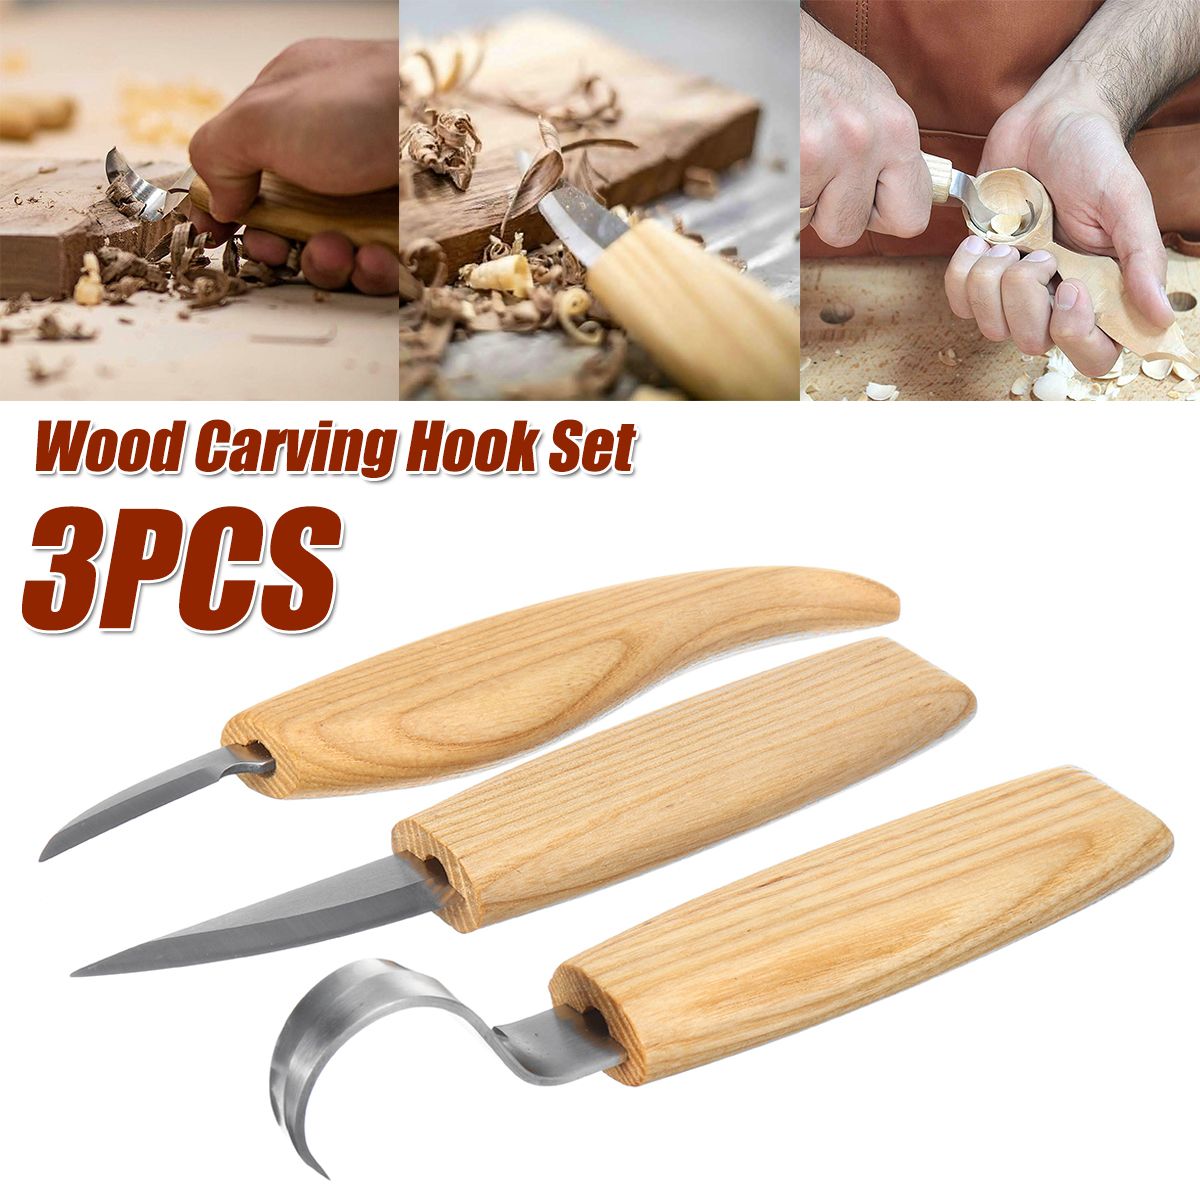 3Pcs-Spoon-Wood-Carving-Whittling-Chisel-Woodworking-Cutter-DIY-Hand-Tool-1565889